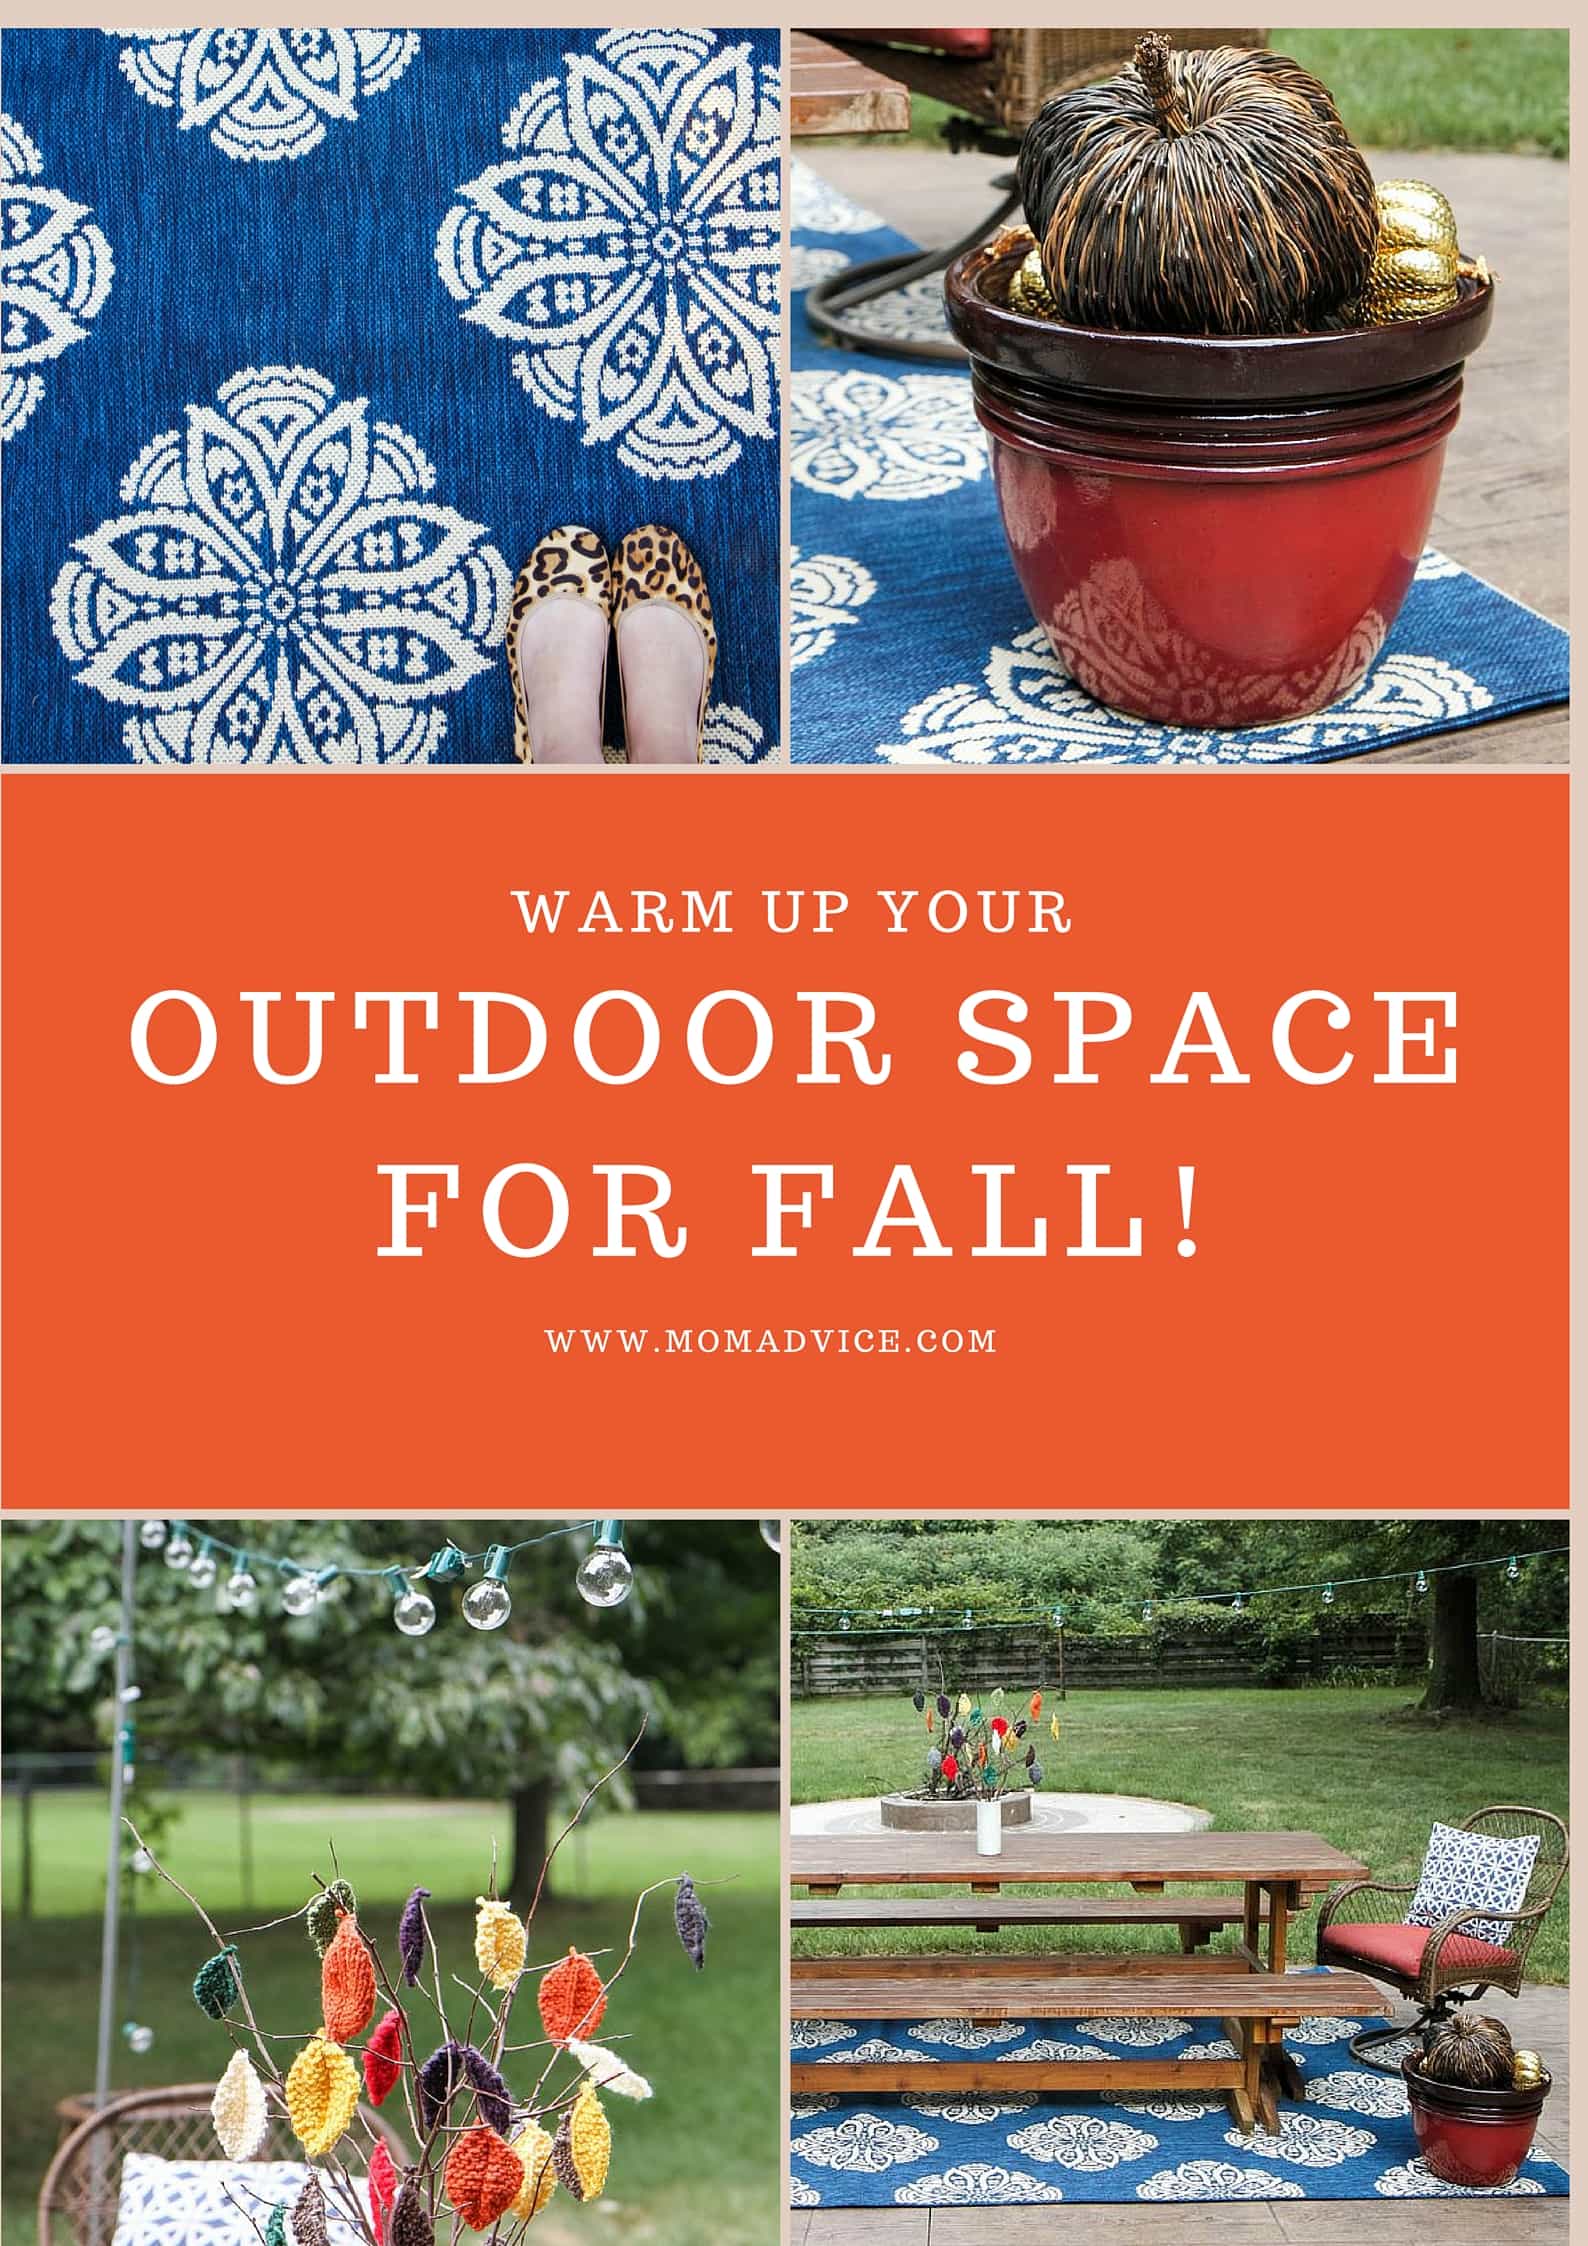 Warm Up Your Outdoor Space for Fall